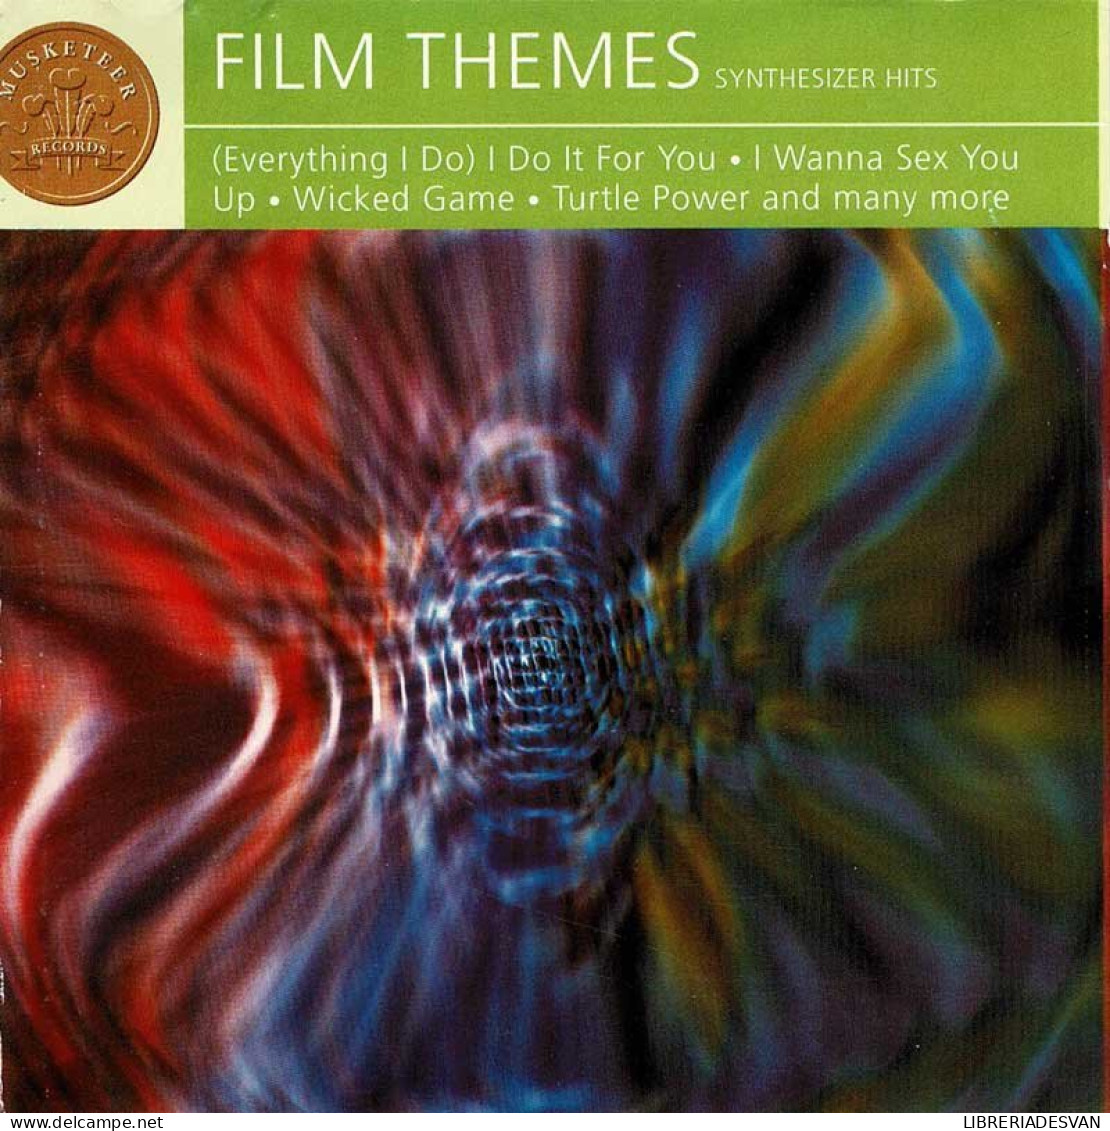 The London Studio Orchestra, The Hollywood Studio Orchestra - Film Themes Synthesizer Hits. CD - Filmmusik